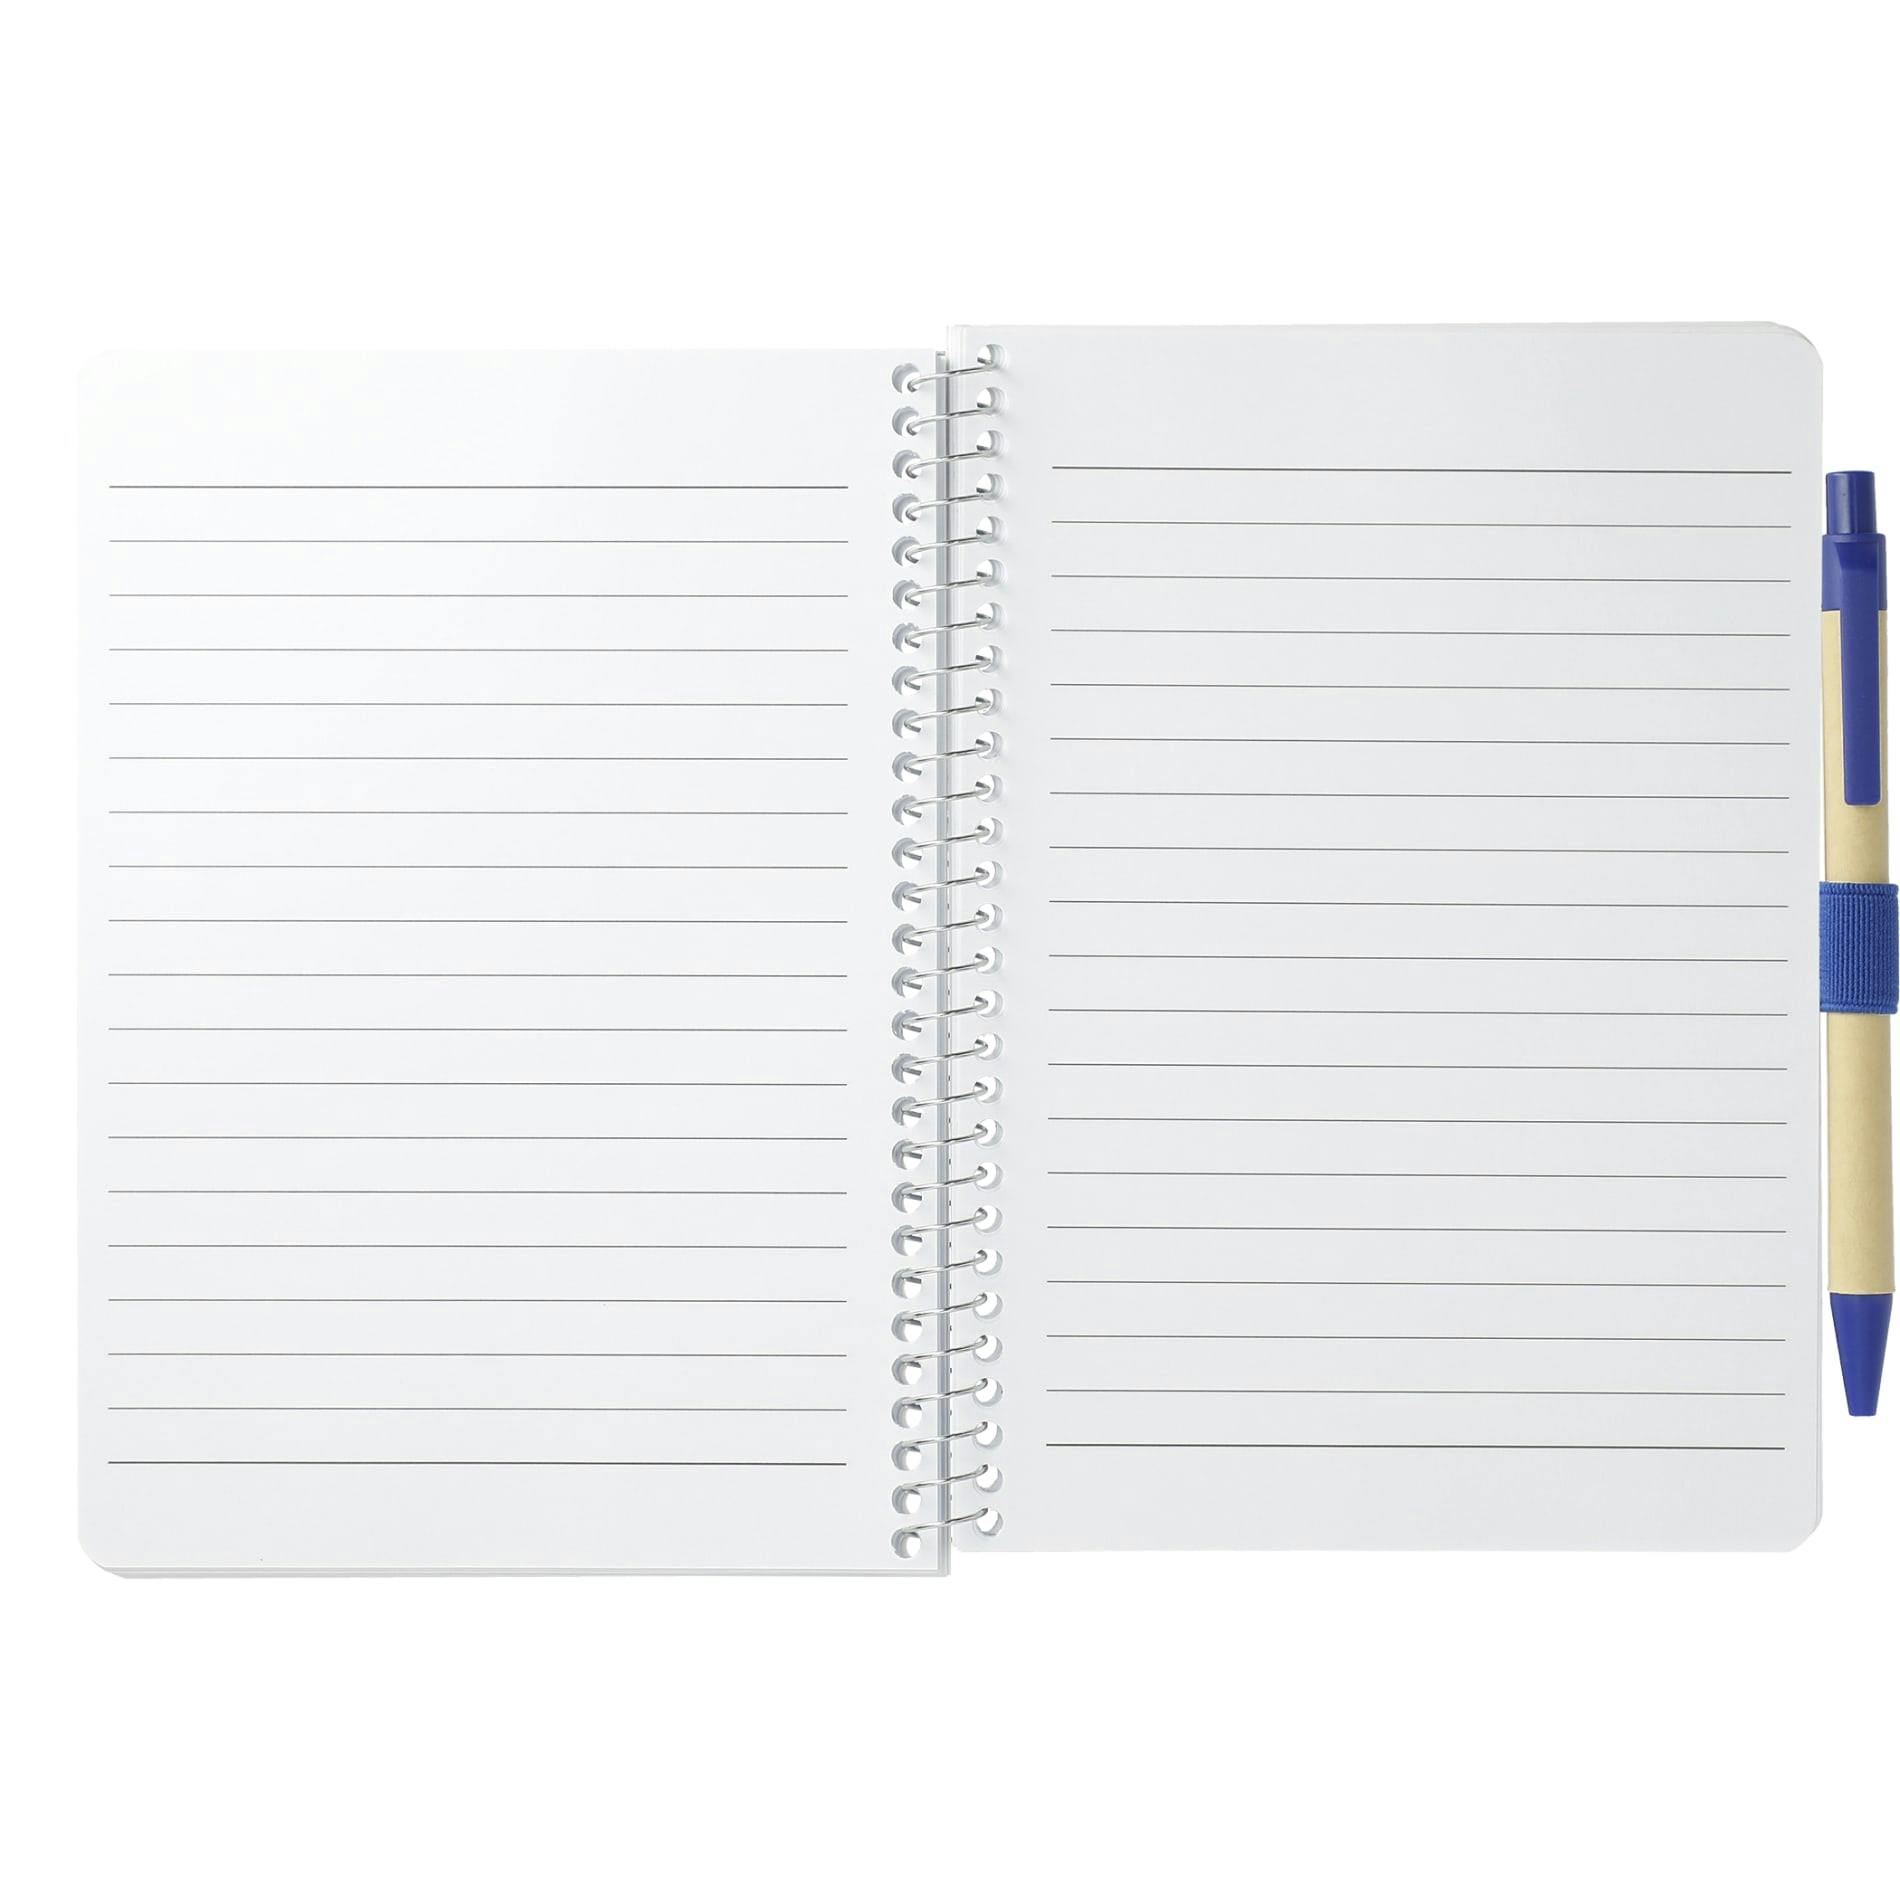 5” x 7” FSC® Mix Spiral Notebook with Pen - additional Image 5